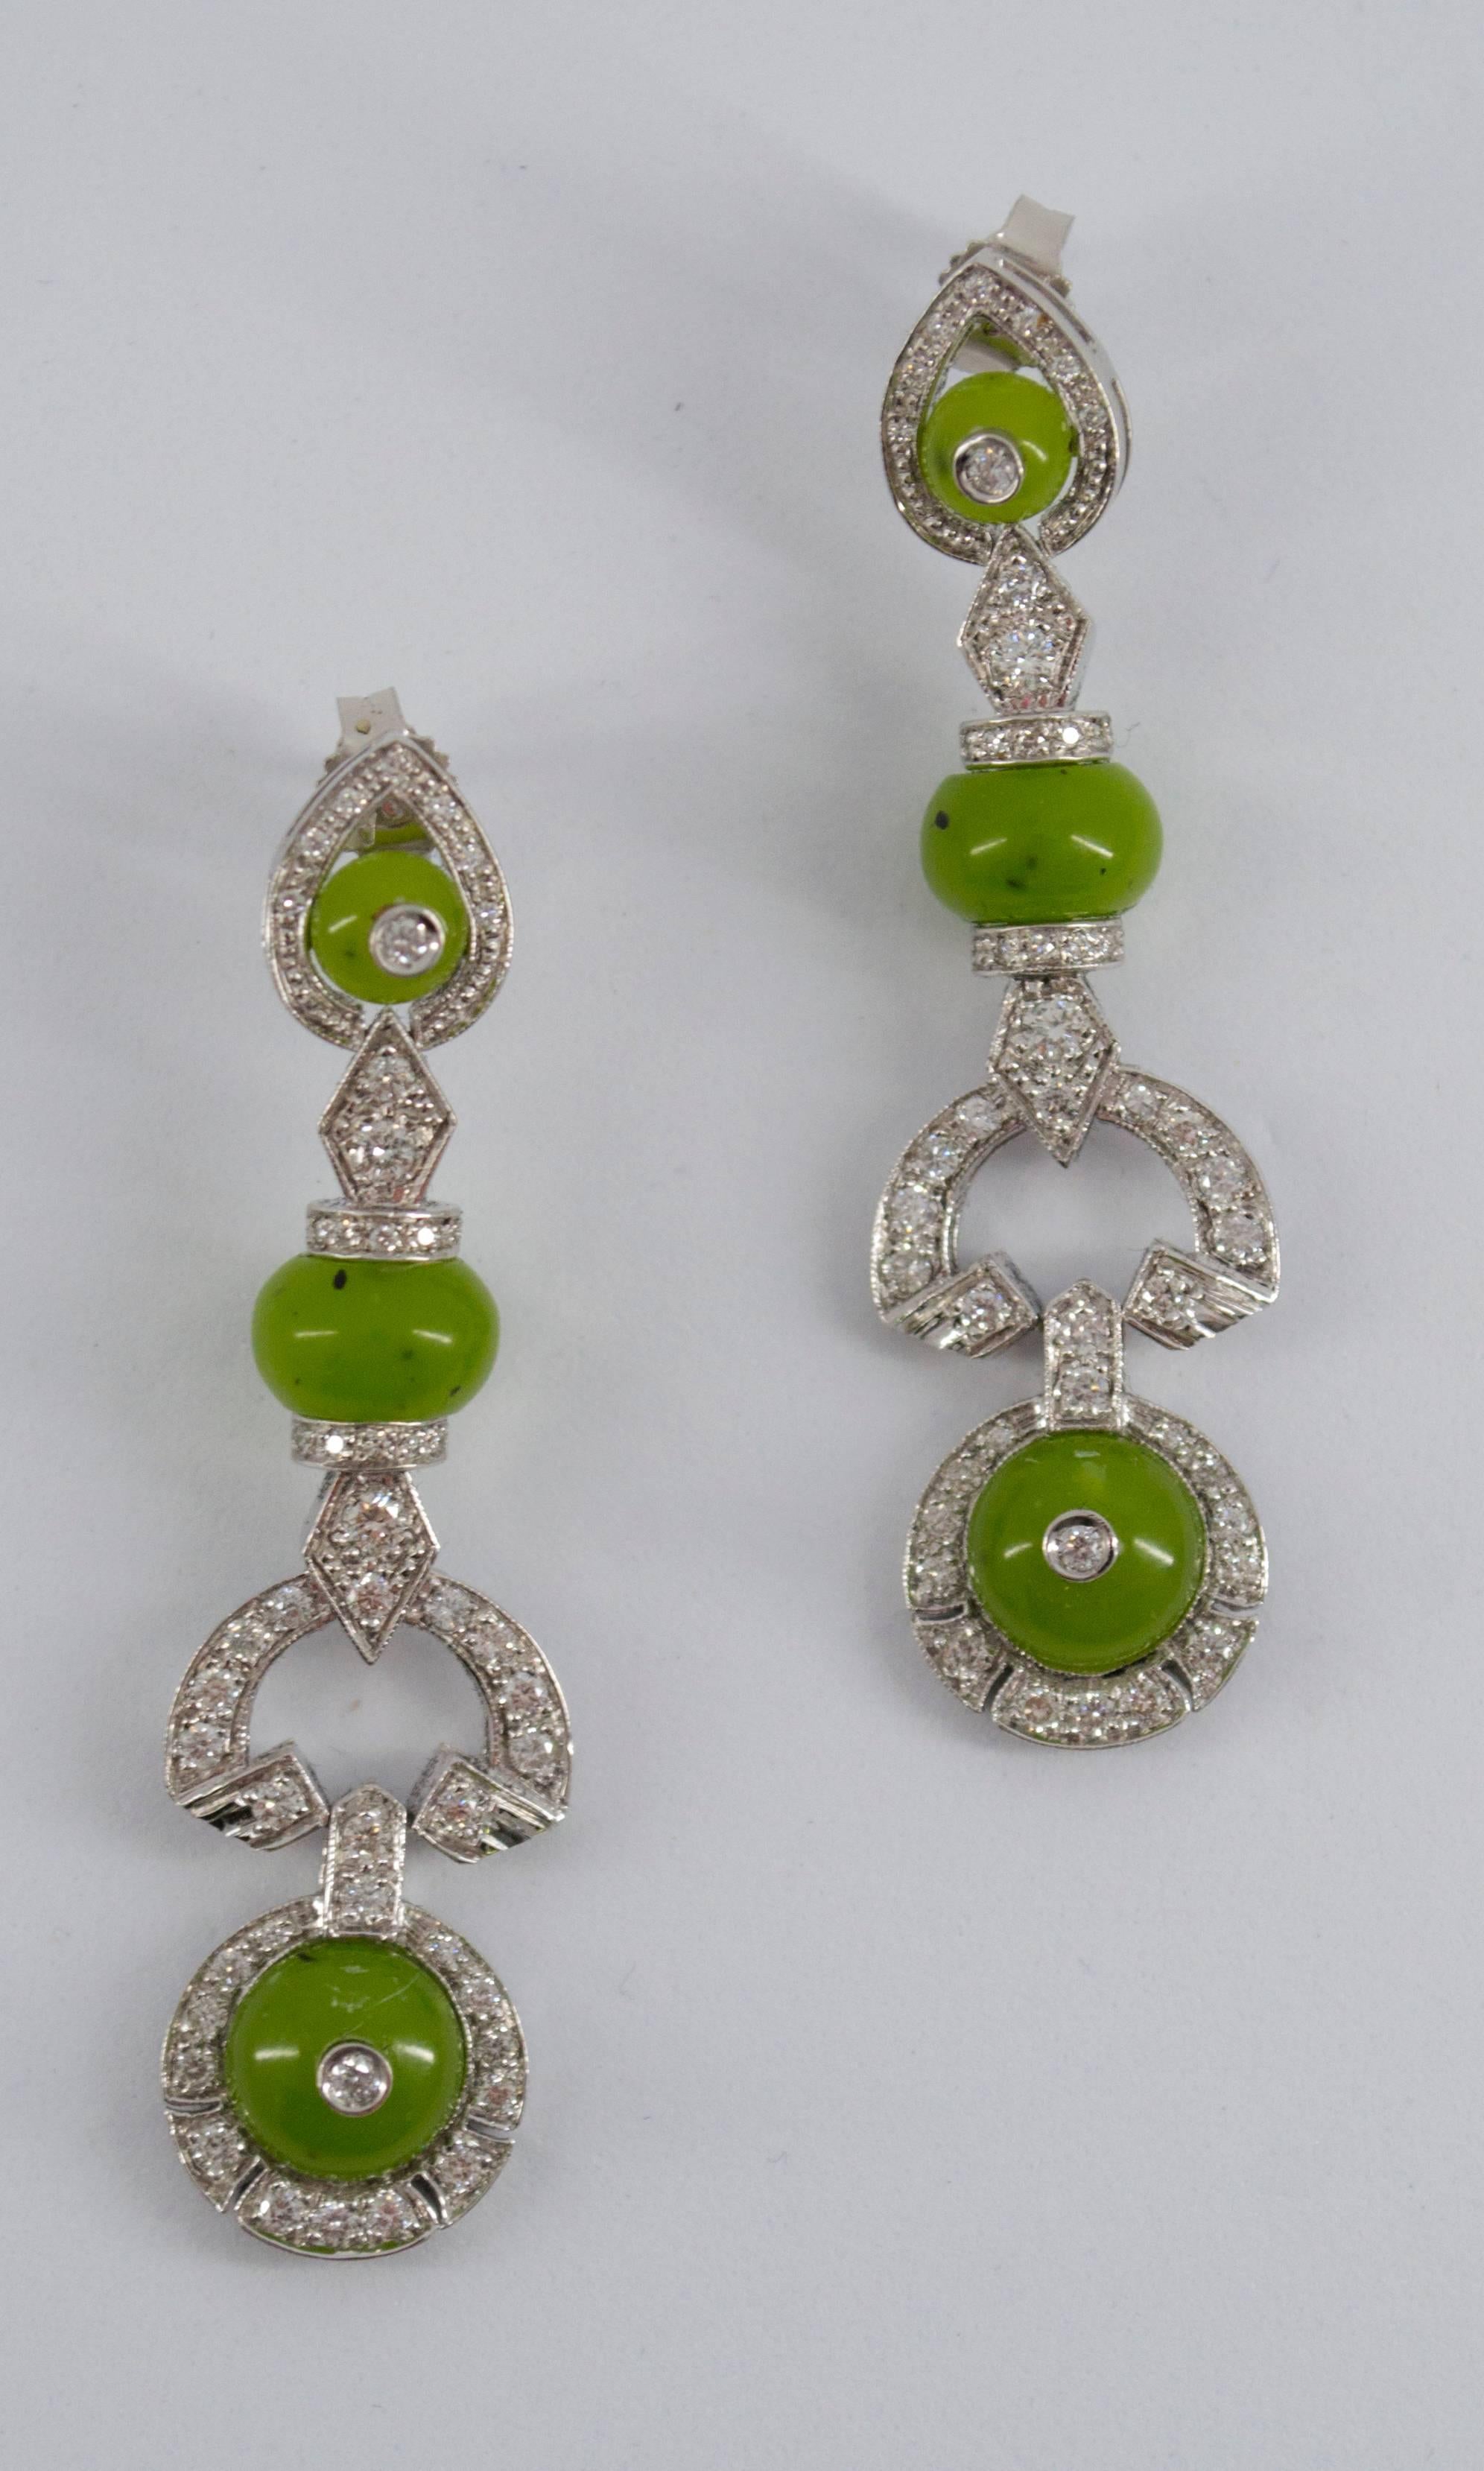 These earrings are made of 9k White Gold.
They have 0.55 Carats of White Diamond and Jade.
All our Earrings have pins for pierced ears but we can change the closure and make any of our Earrings suitable even for non-pierced ears.
We're a workshop so